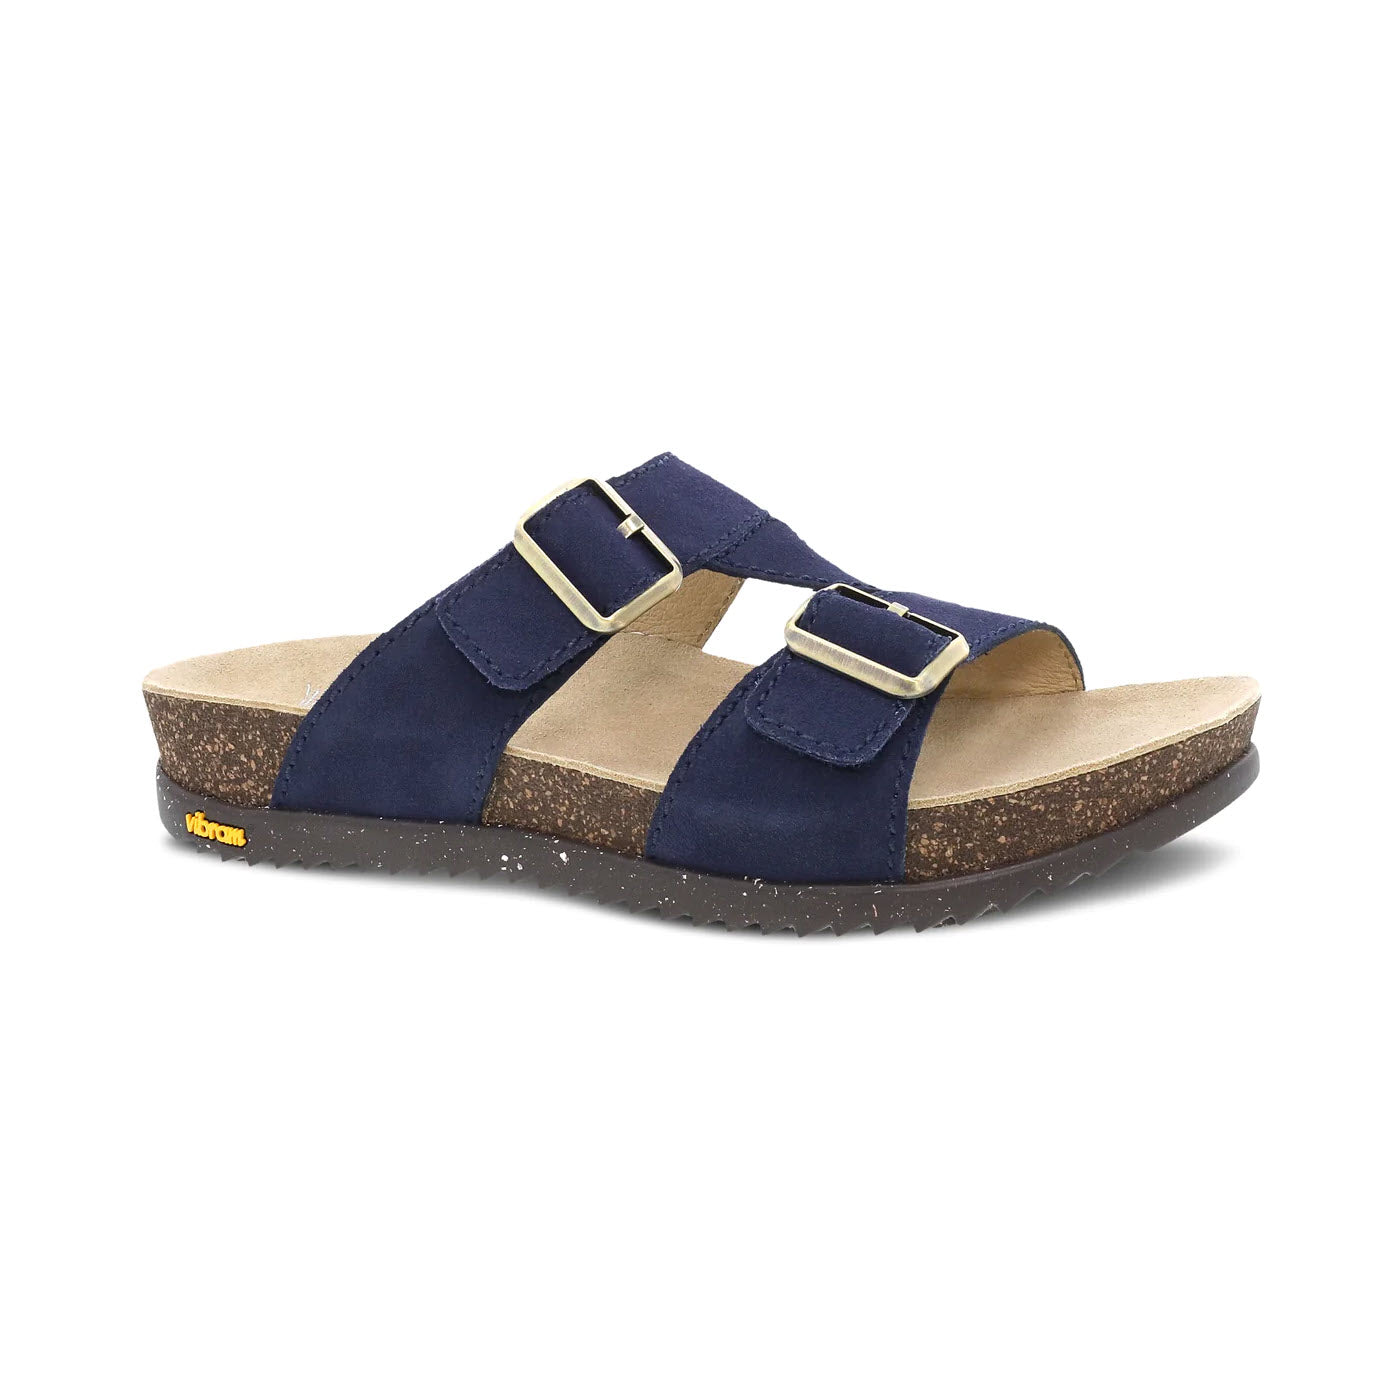 A single Dansko Dayna Navy - Womens sandal with two adjustable straps and a Vibram ECOSTEP EVO rubber outsole against a white background.